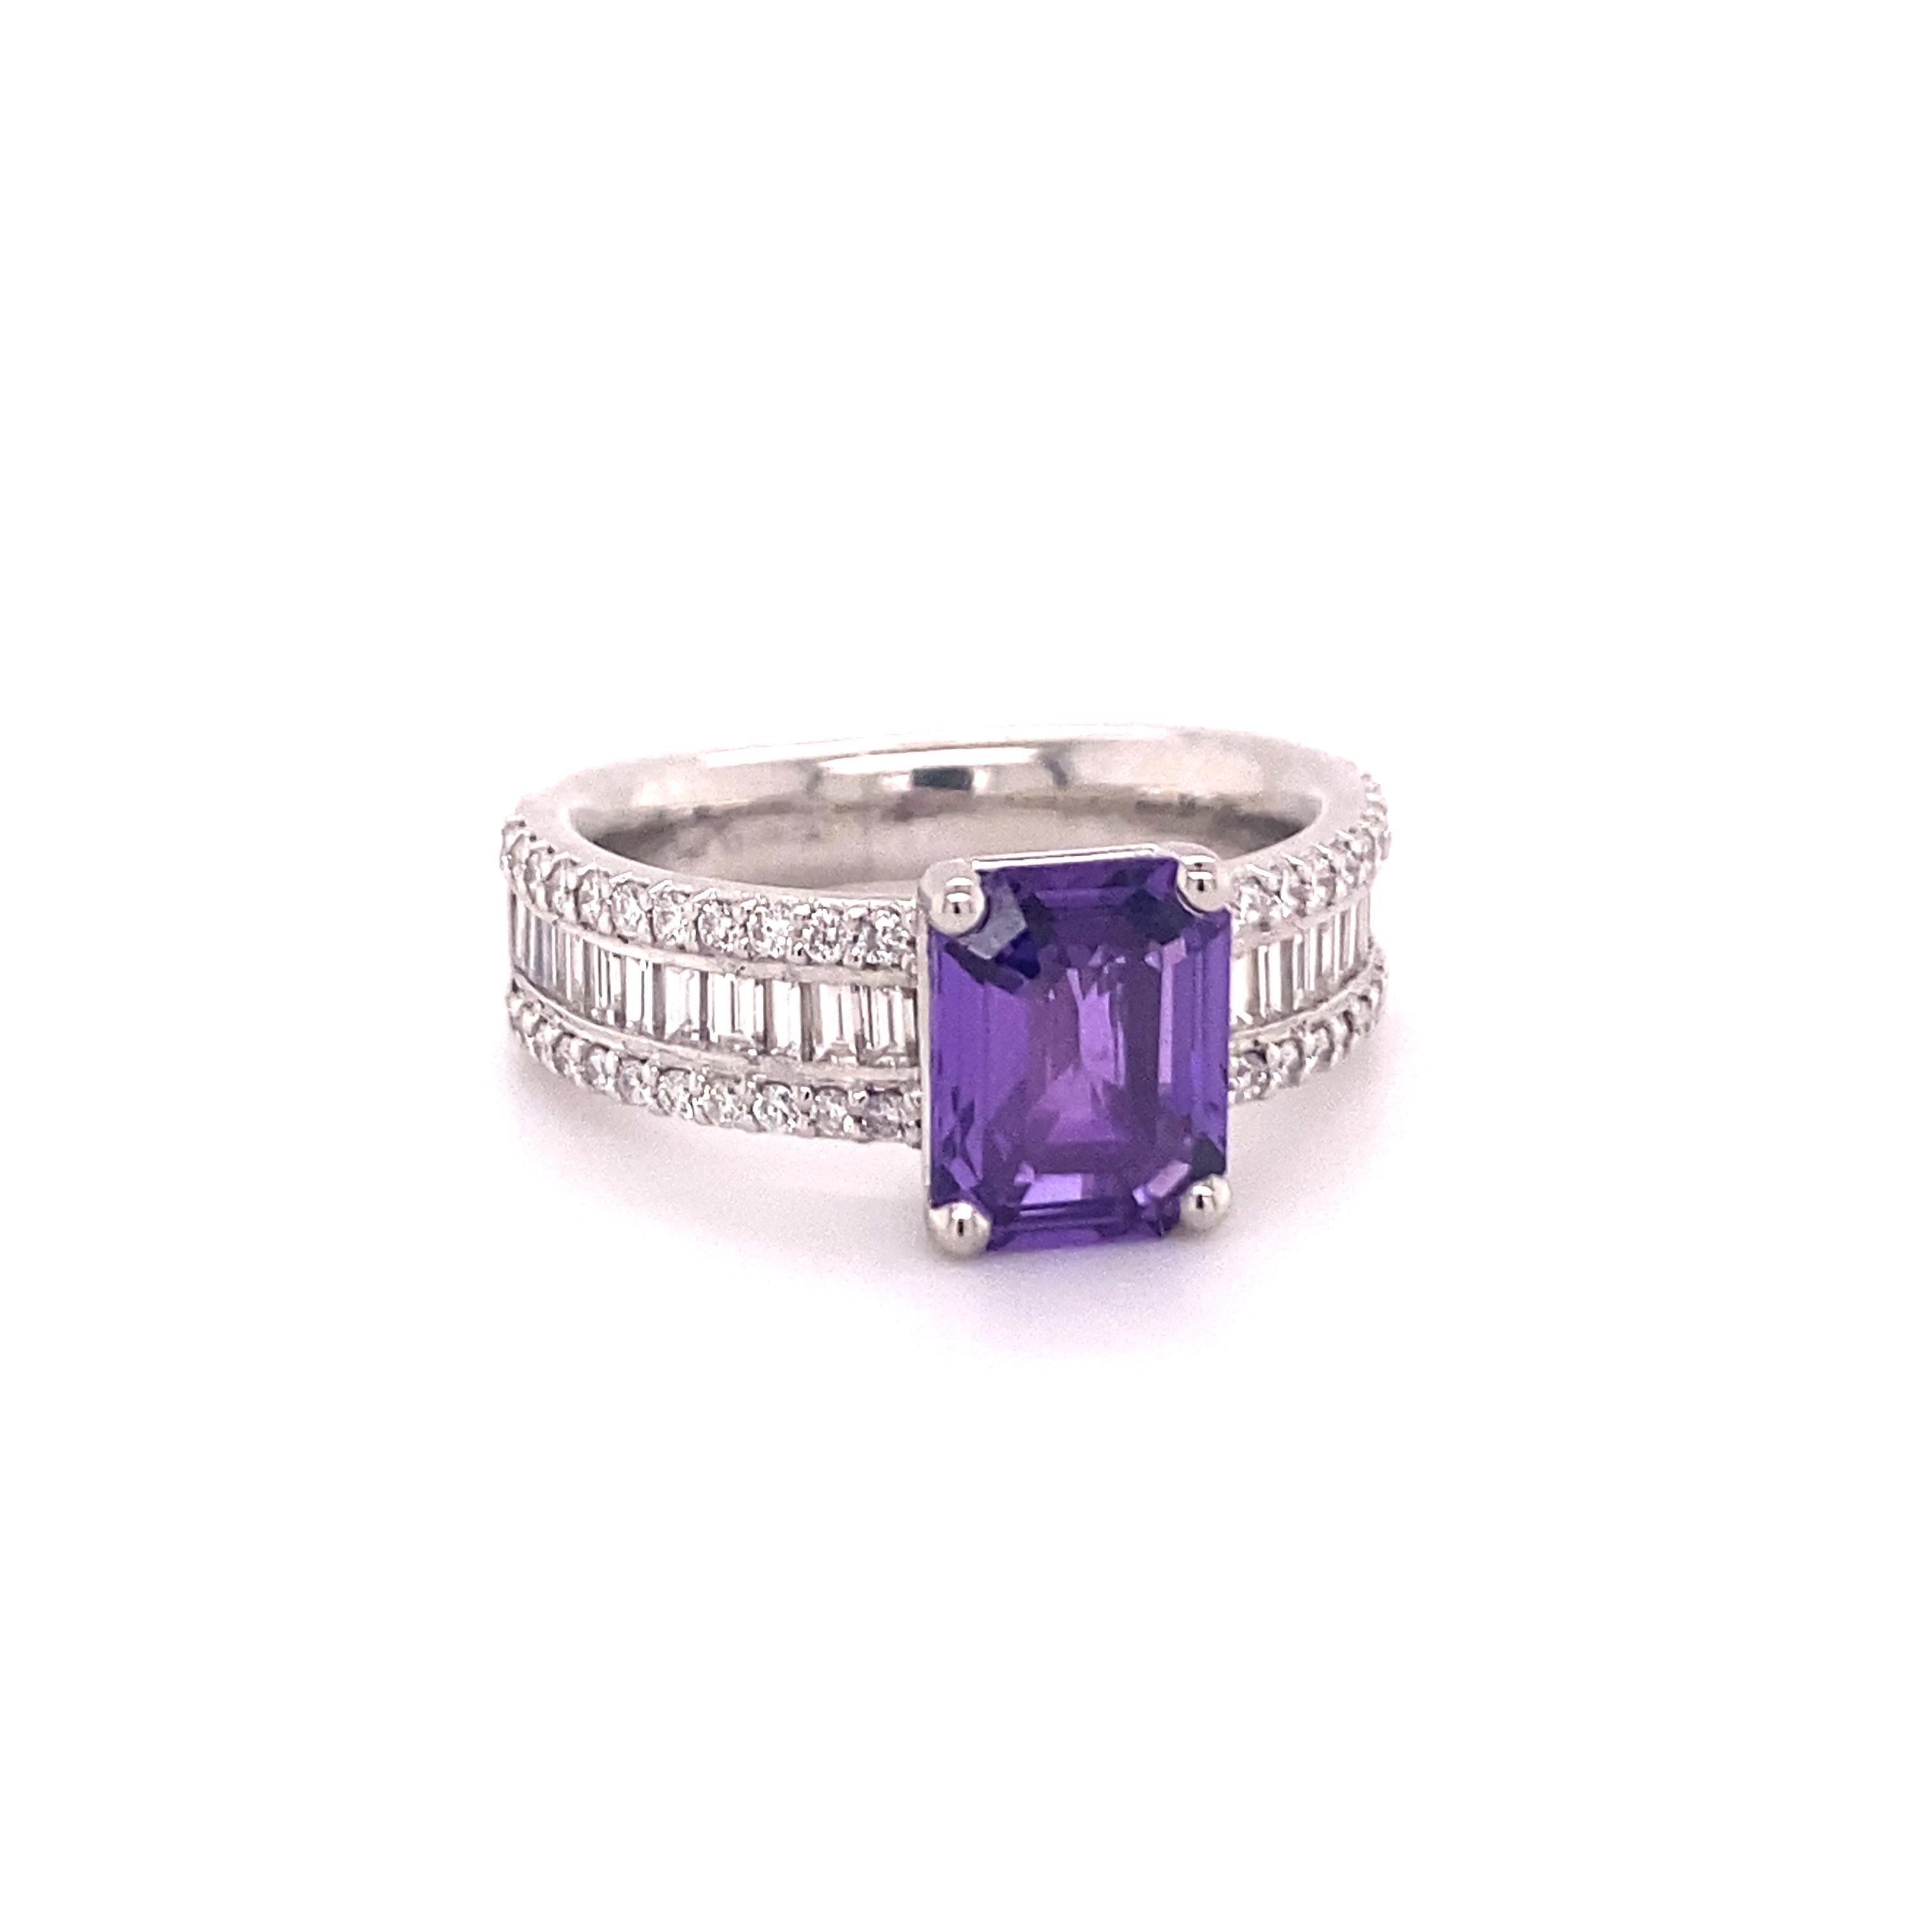 Modern Sparkling Purple Sapphire Ring with Diamonds Set in Platinum 950 For Sale